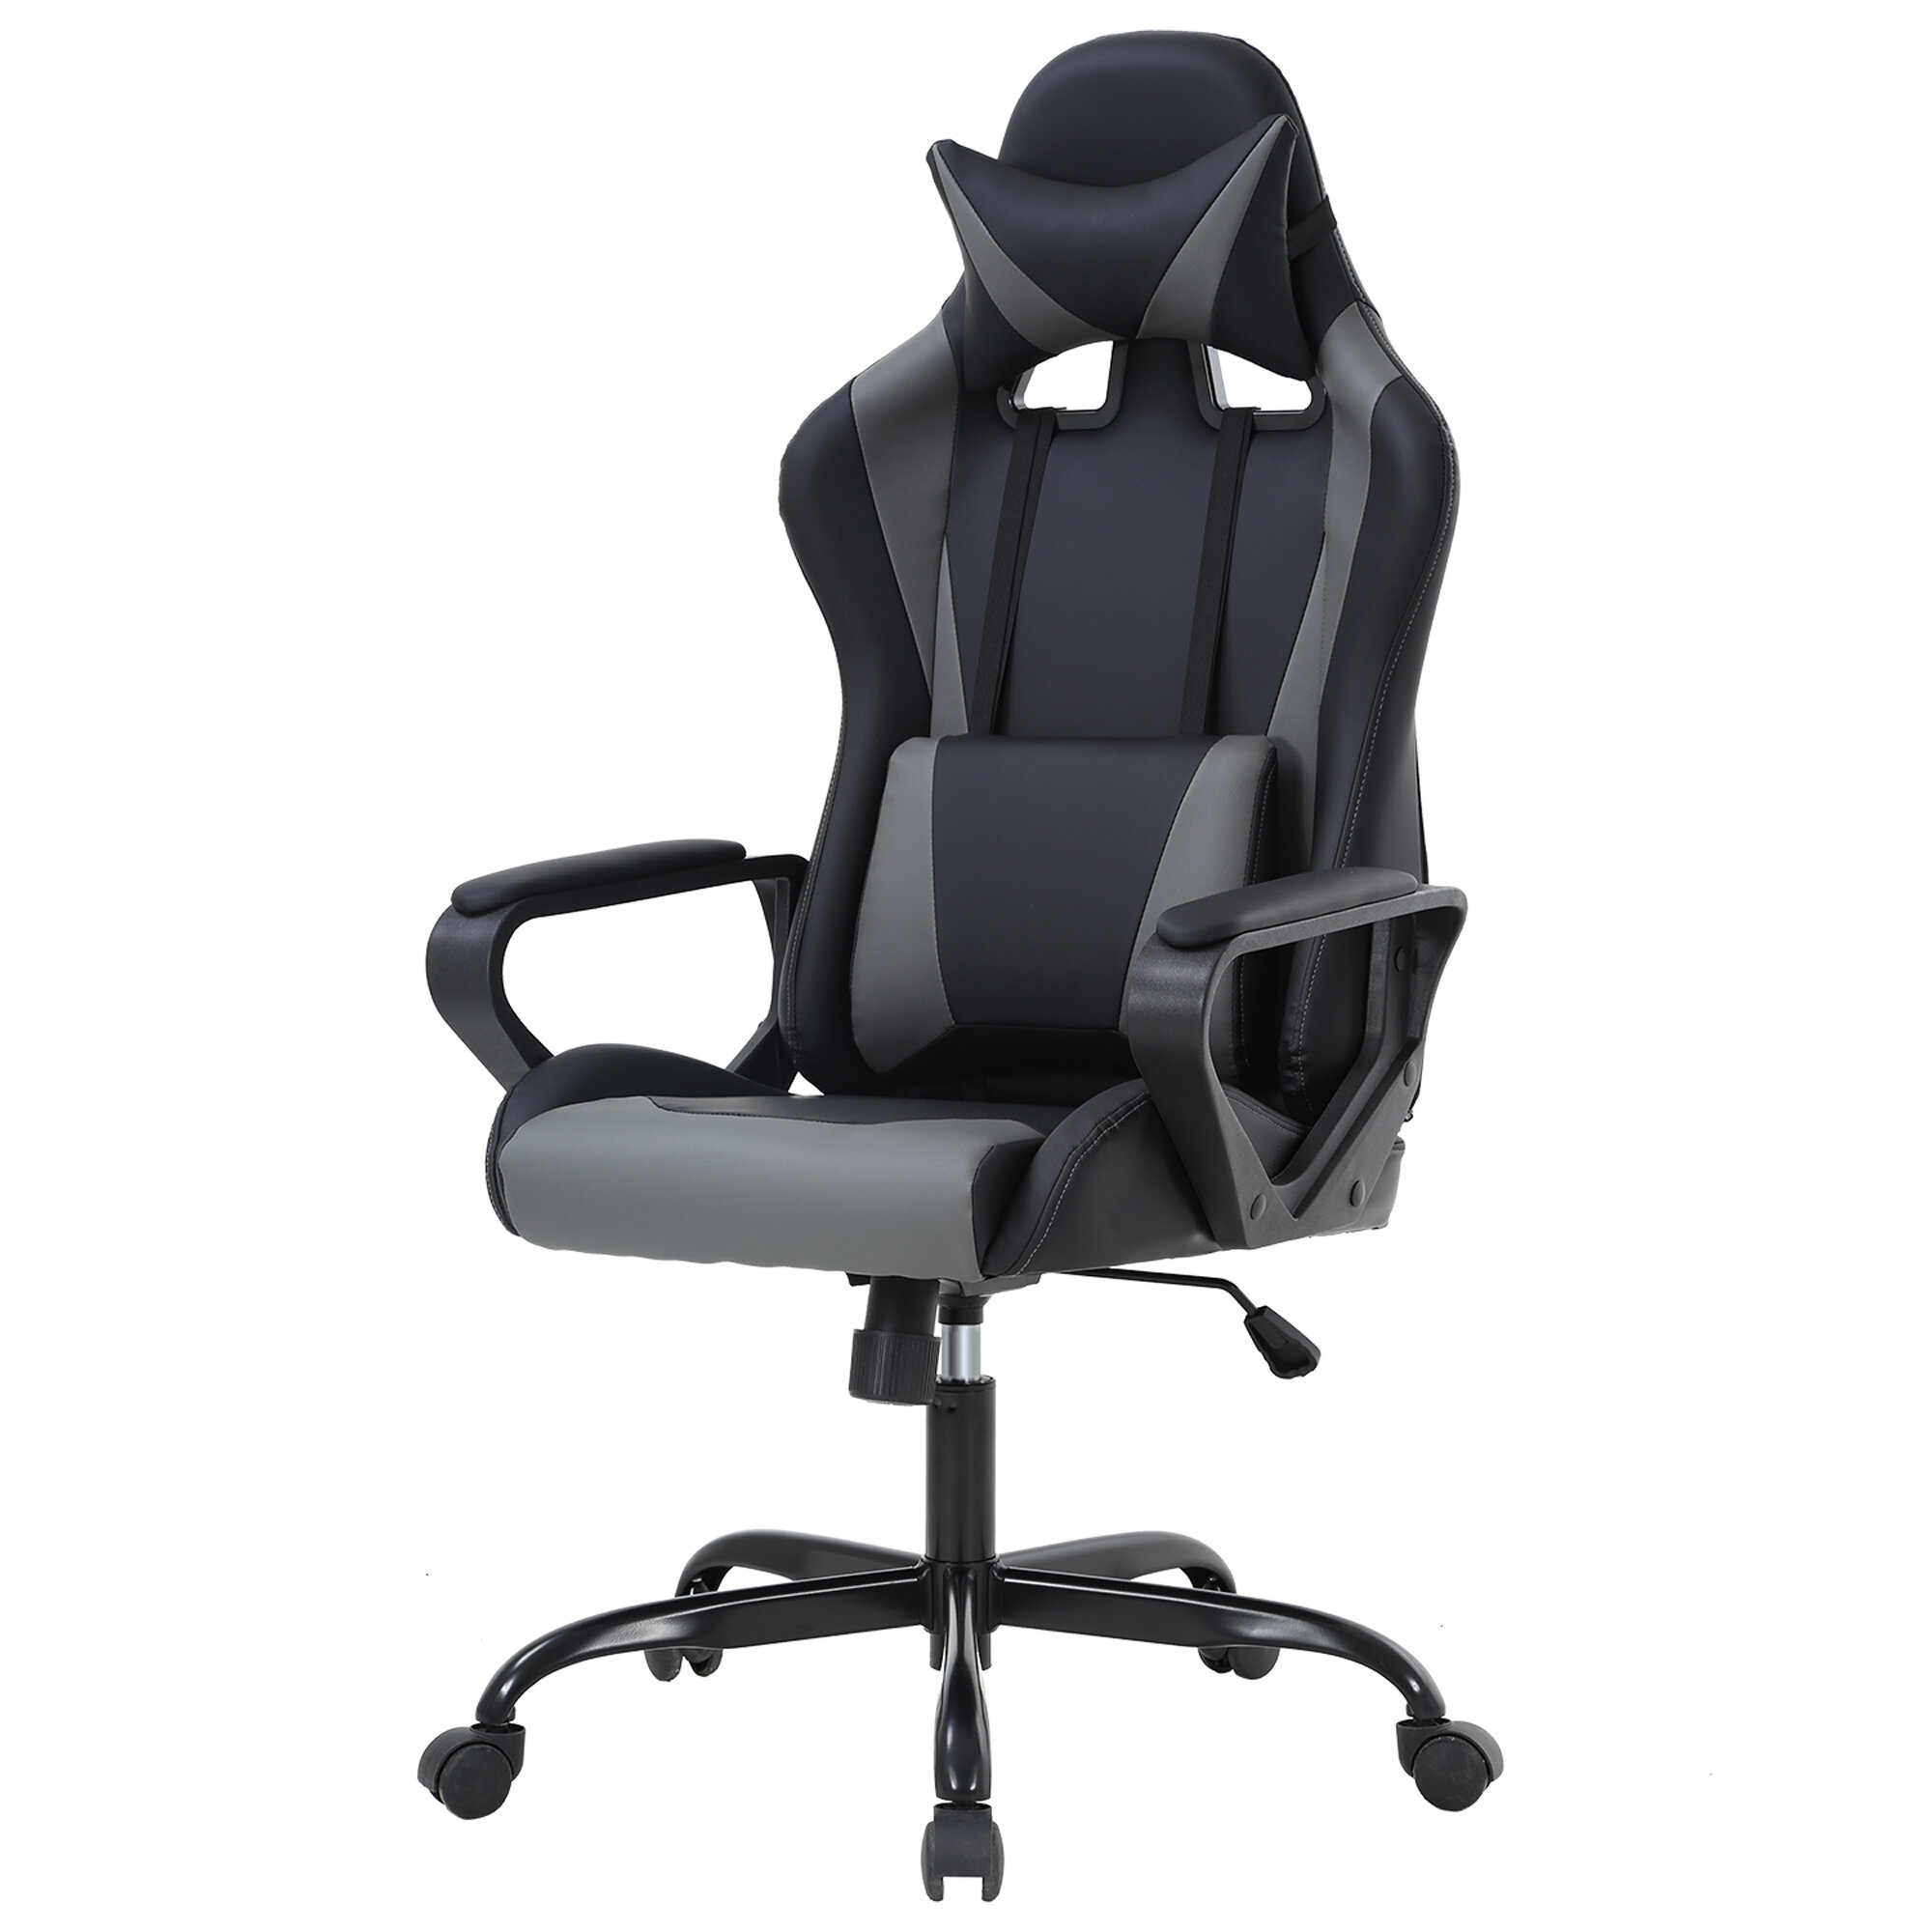 Details about   High Back Home Office Desk Chair Ergonomic Swivel Task Chair Gaming Chair Gray 